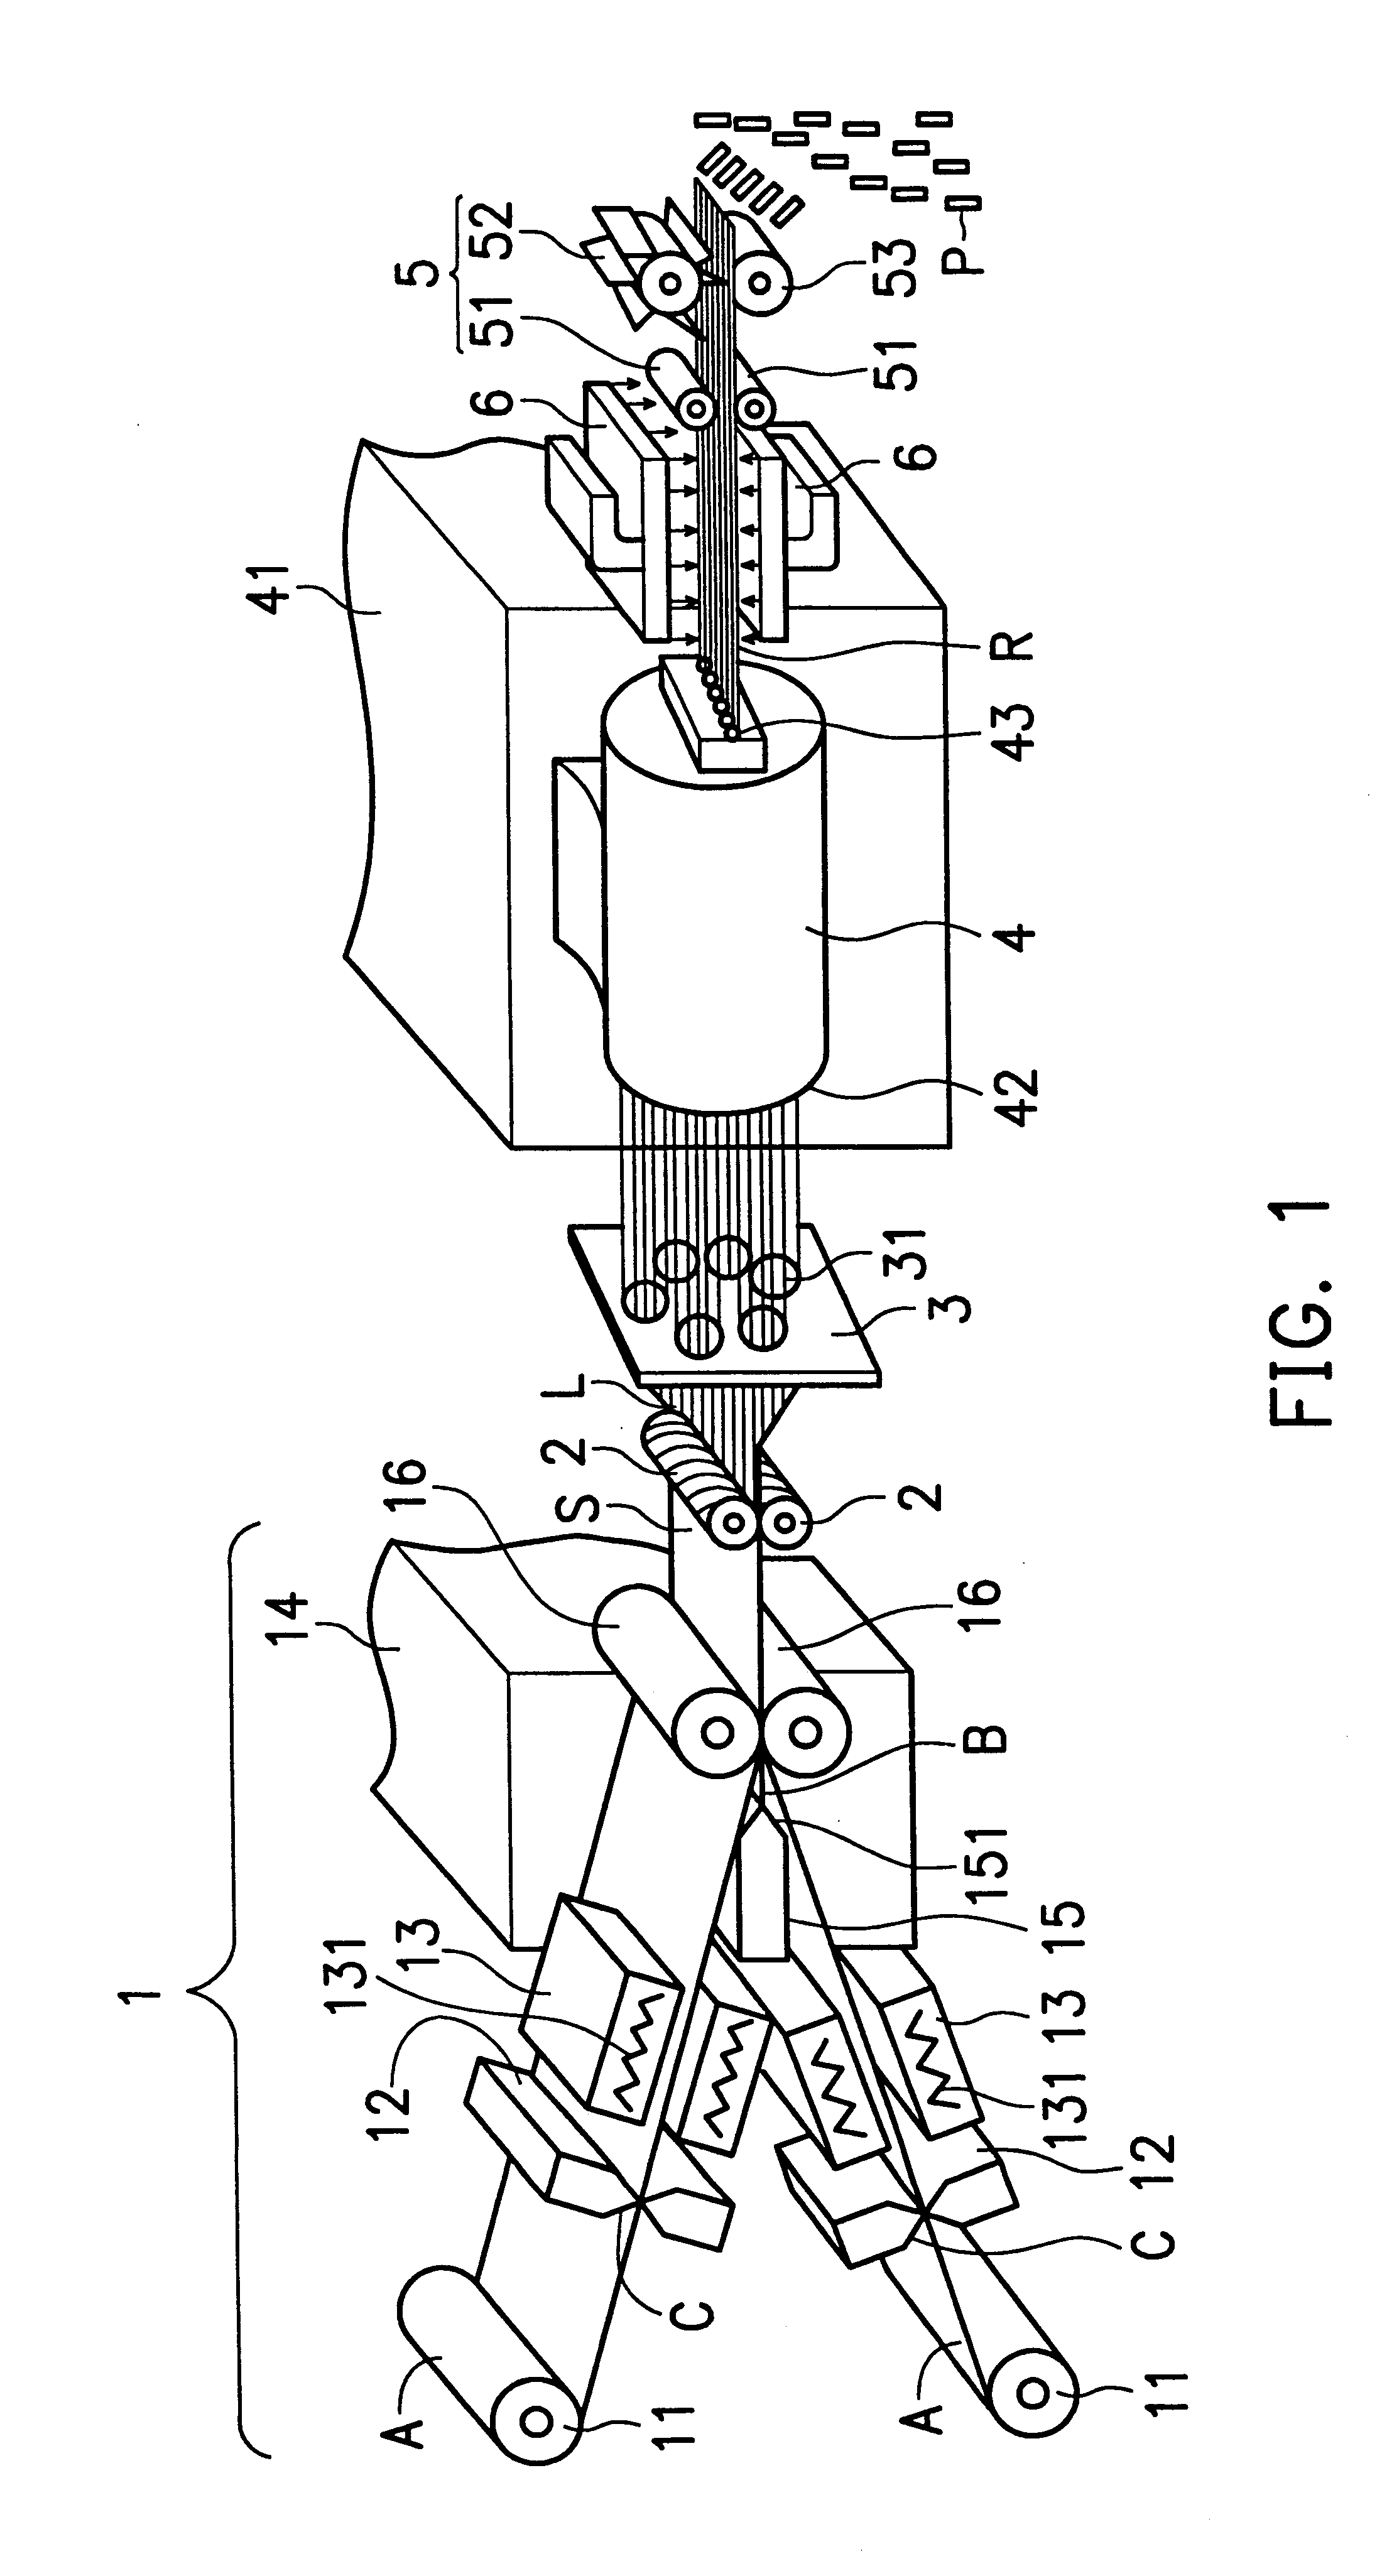 Process and apparatus for making radially arranged aluminum foil-filled plastic pellets to shield against electromagnetic interference